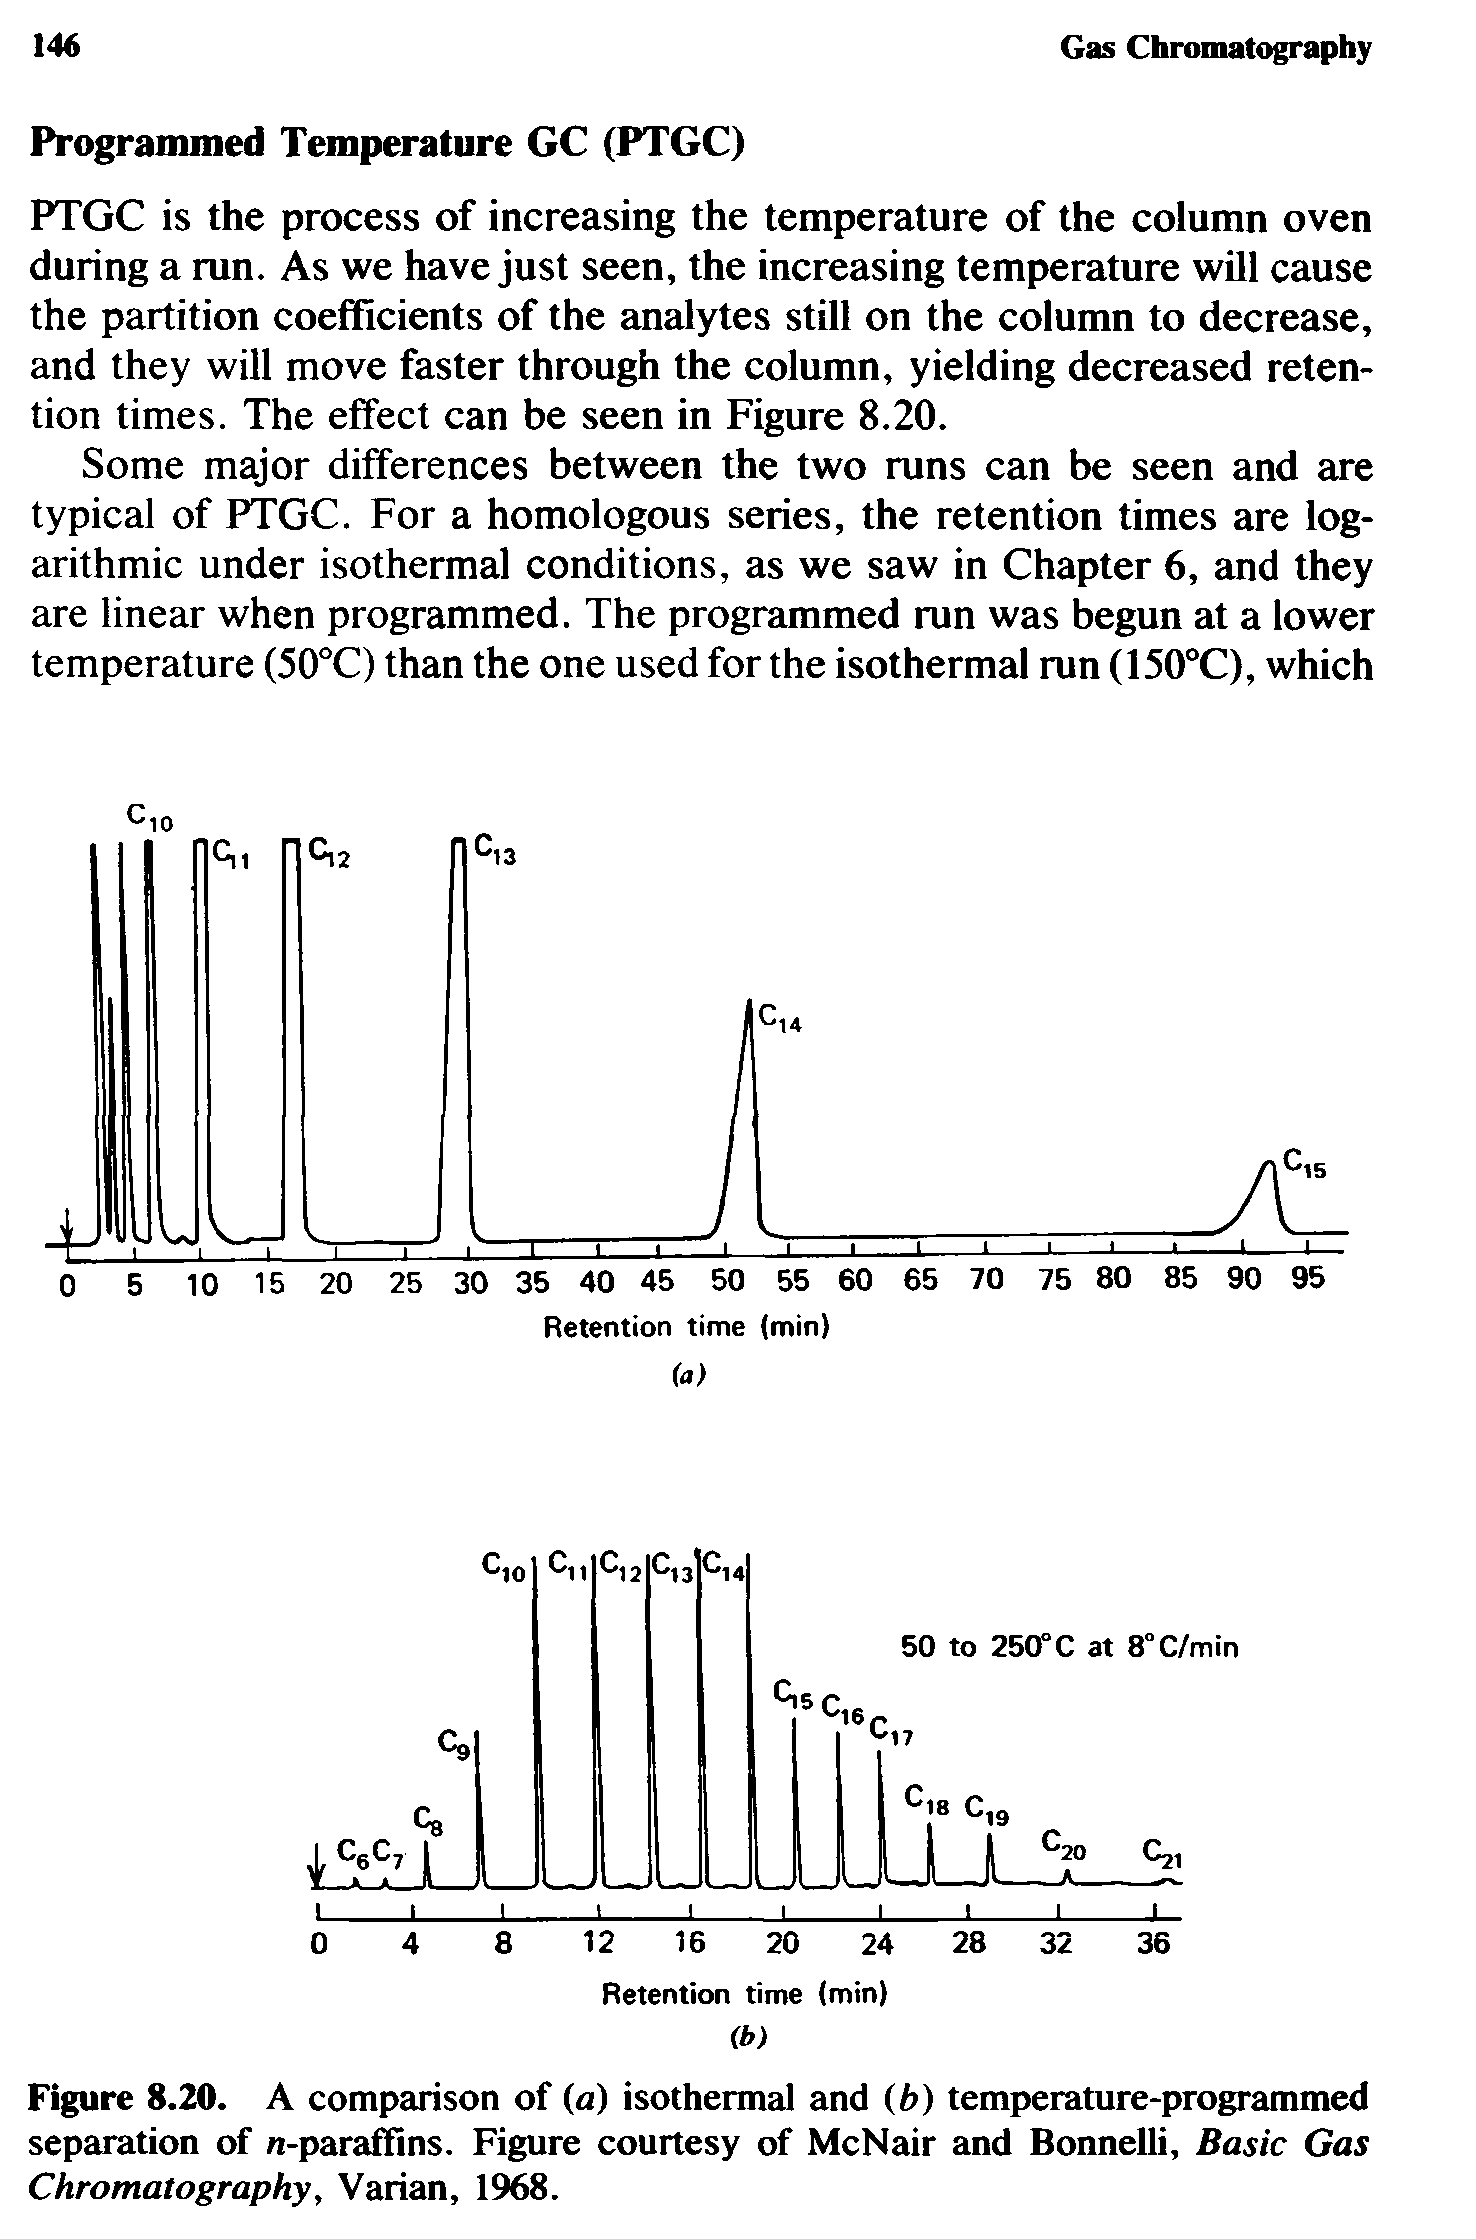 Figure 8.20. A comparison of (a) isothermal and (b) temperature-programmed separation of ra-paraffins. Figure courtesy of McNair and Bonnelli, Basic Gas Chromatography, Varian, 1968.